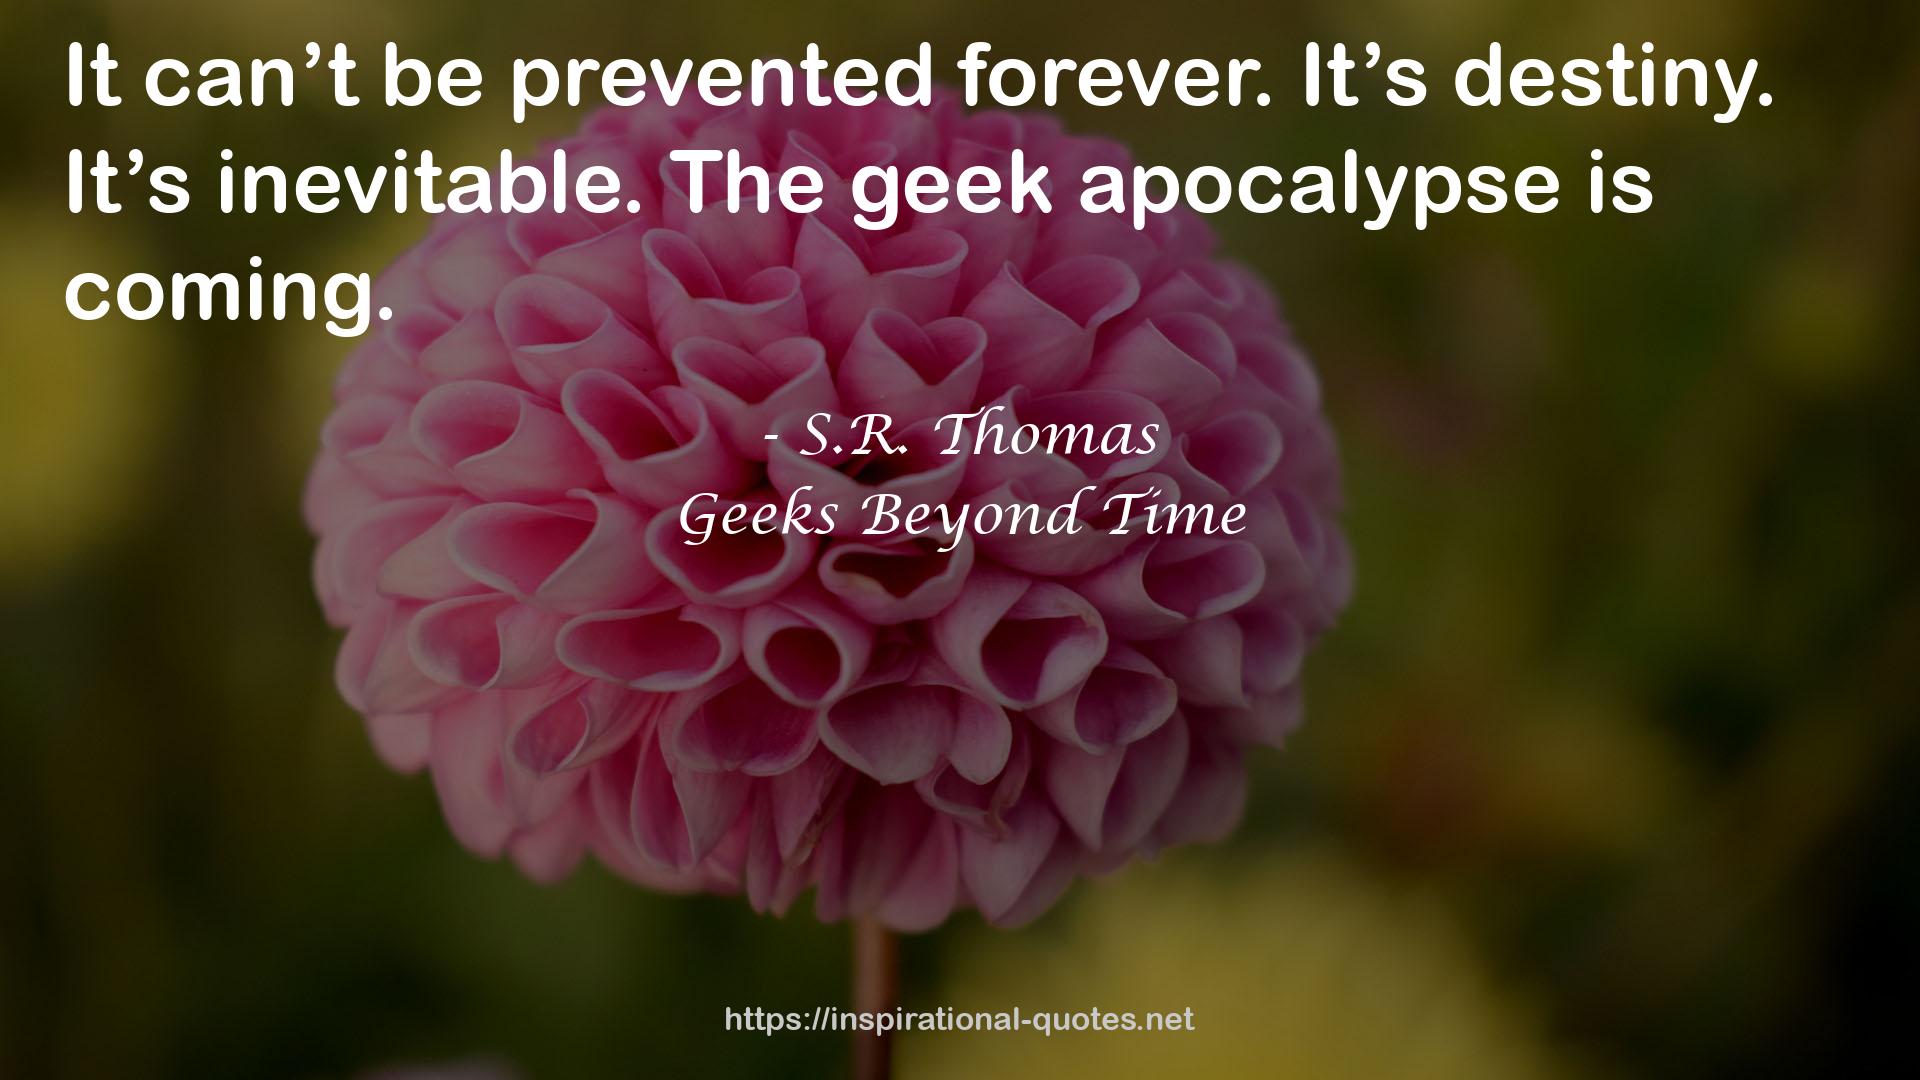 Geeks Beyond Time QUOTES